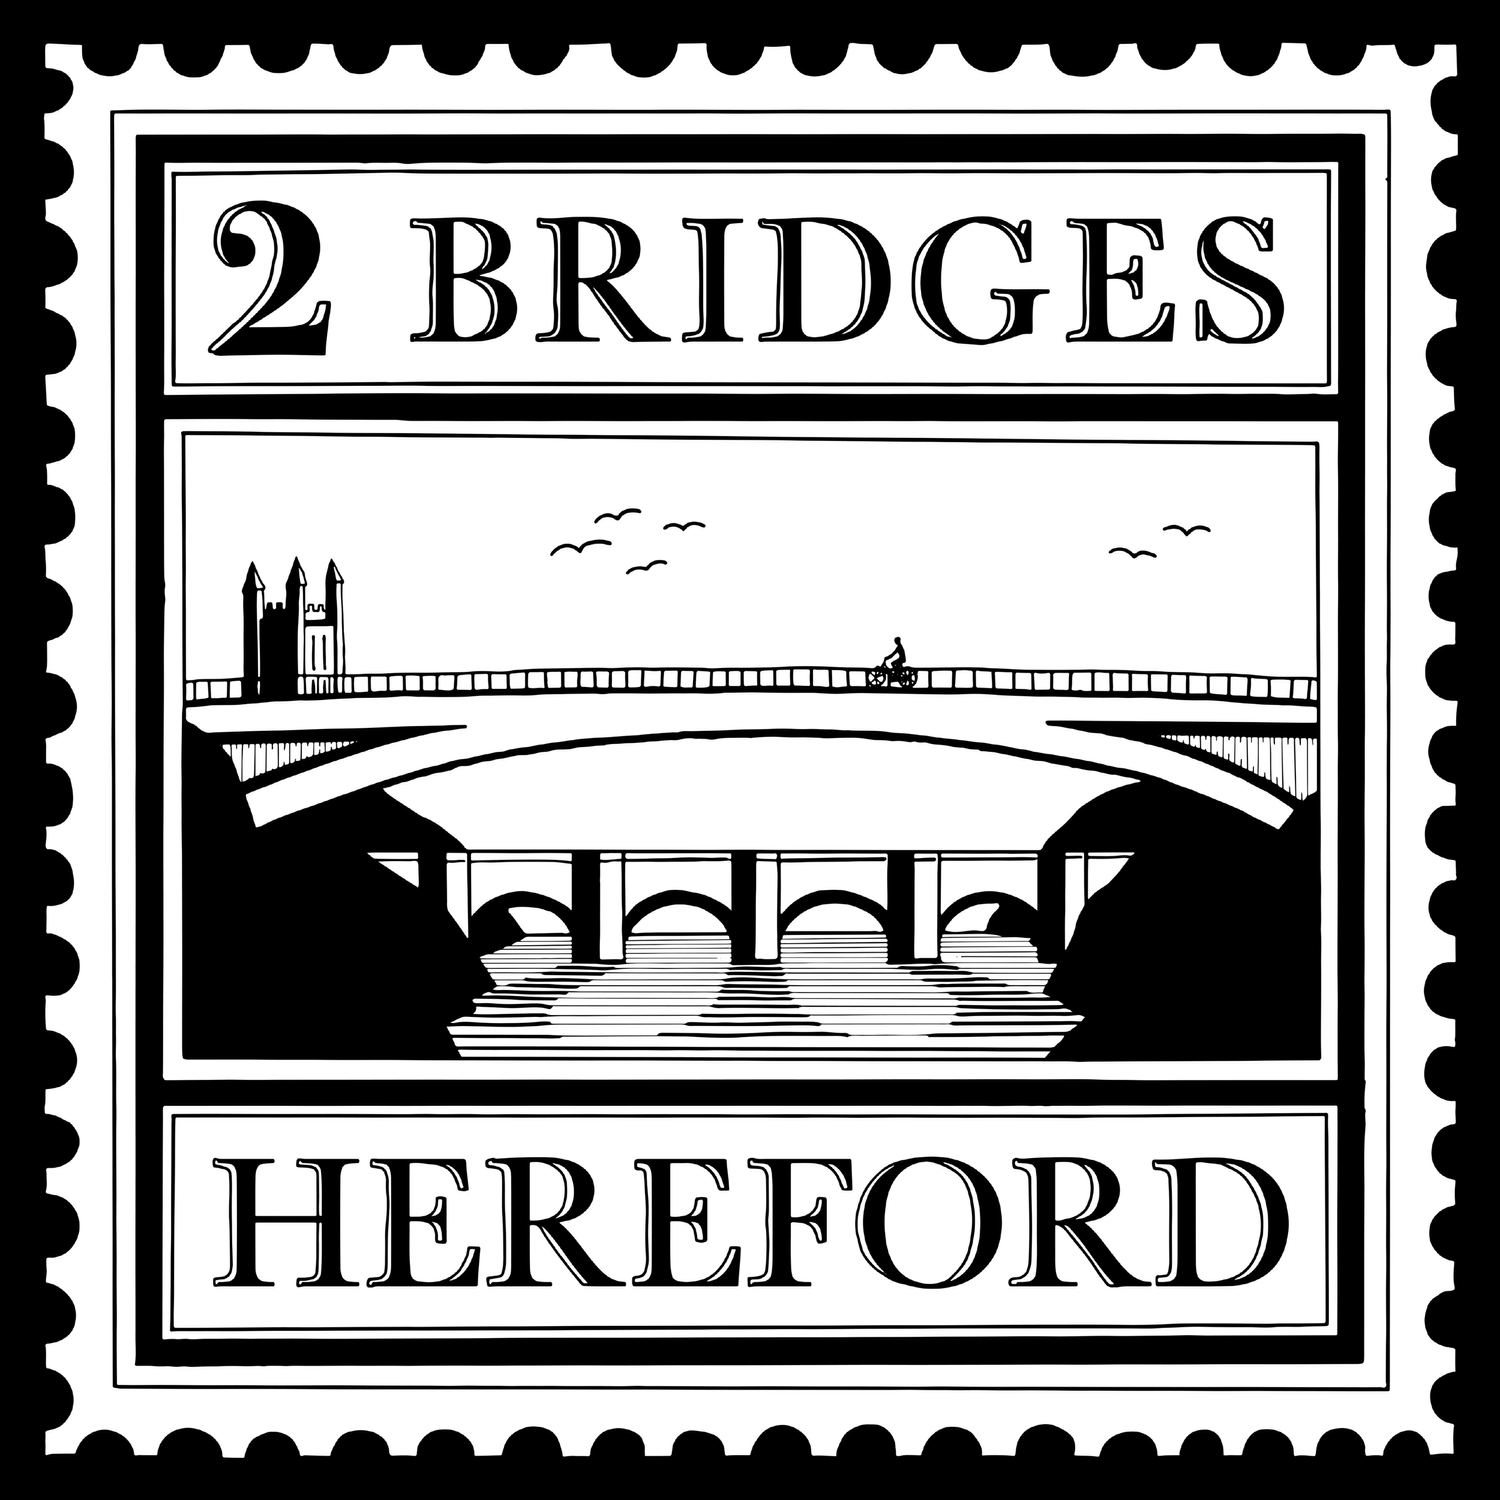 2 Bridges Hereford - Tapas, Small Plates and Sunday Roast in Hereford